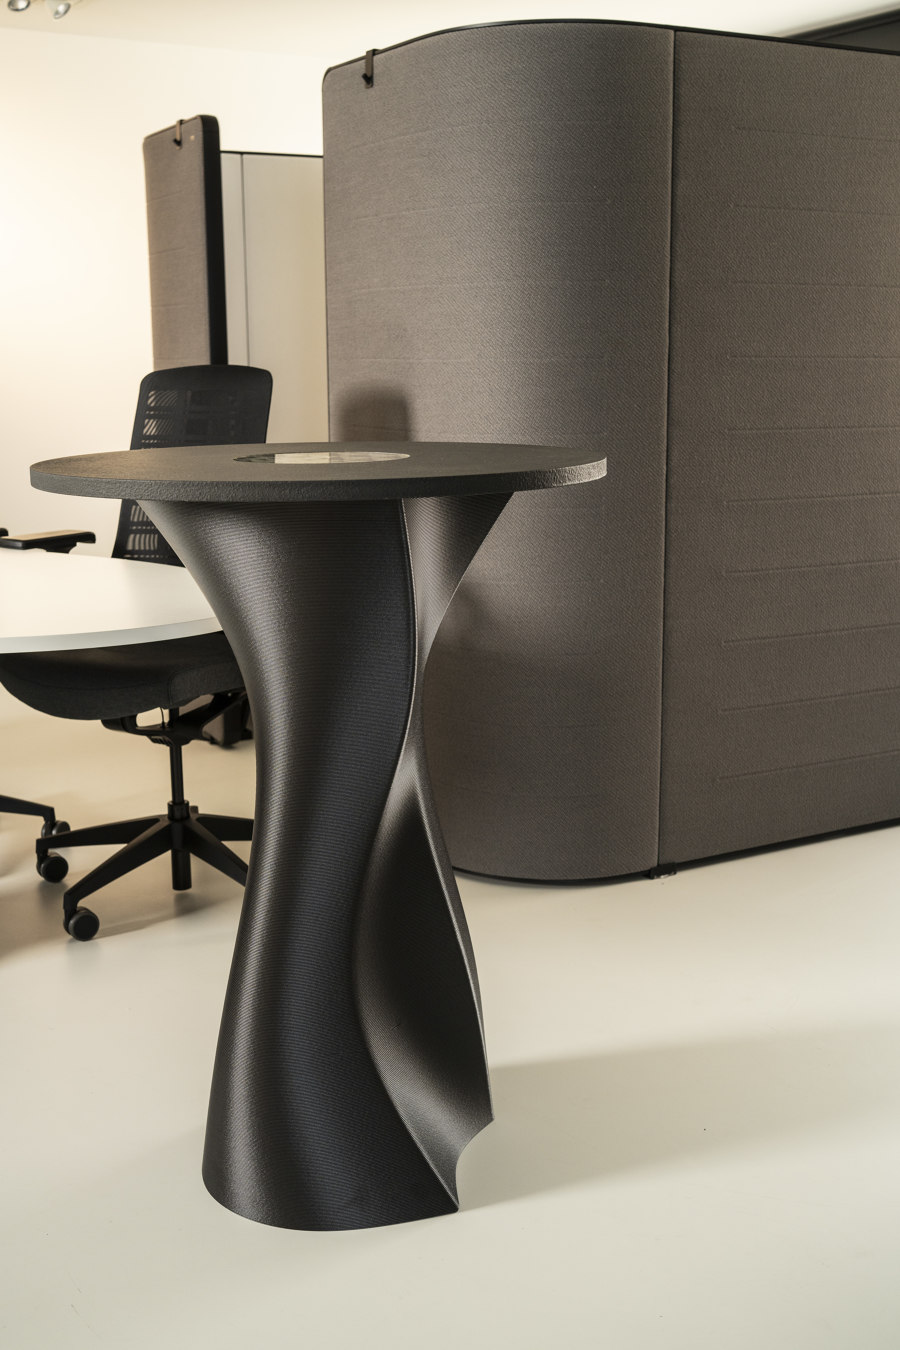 Crafting more from less with Triboo’s circular furniture solutions | News